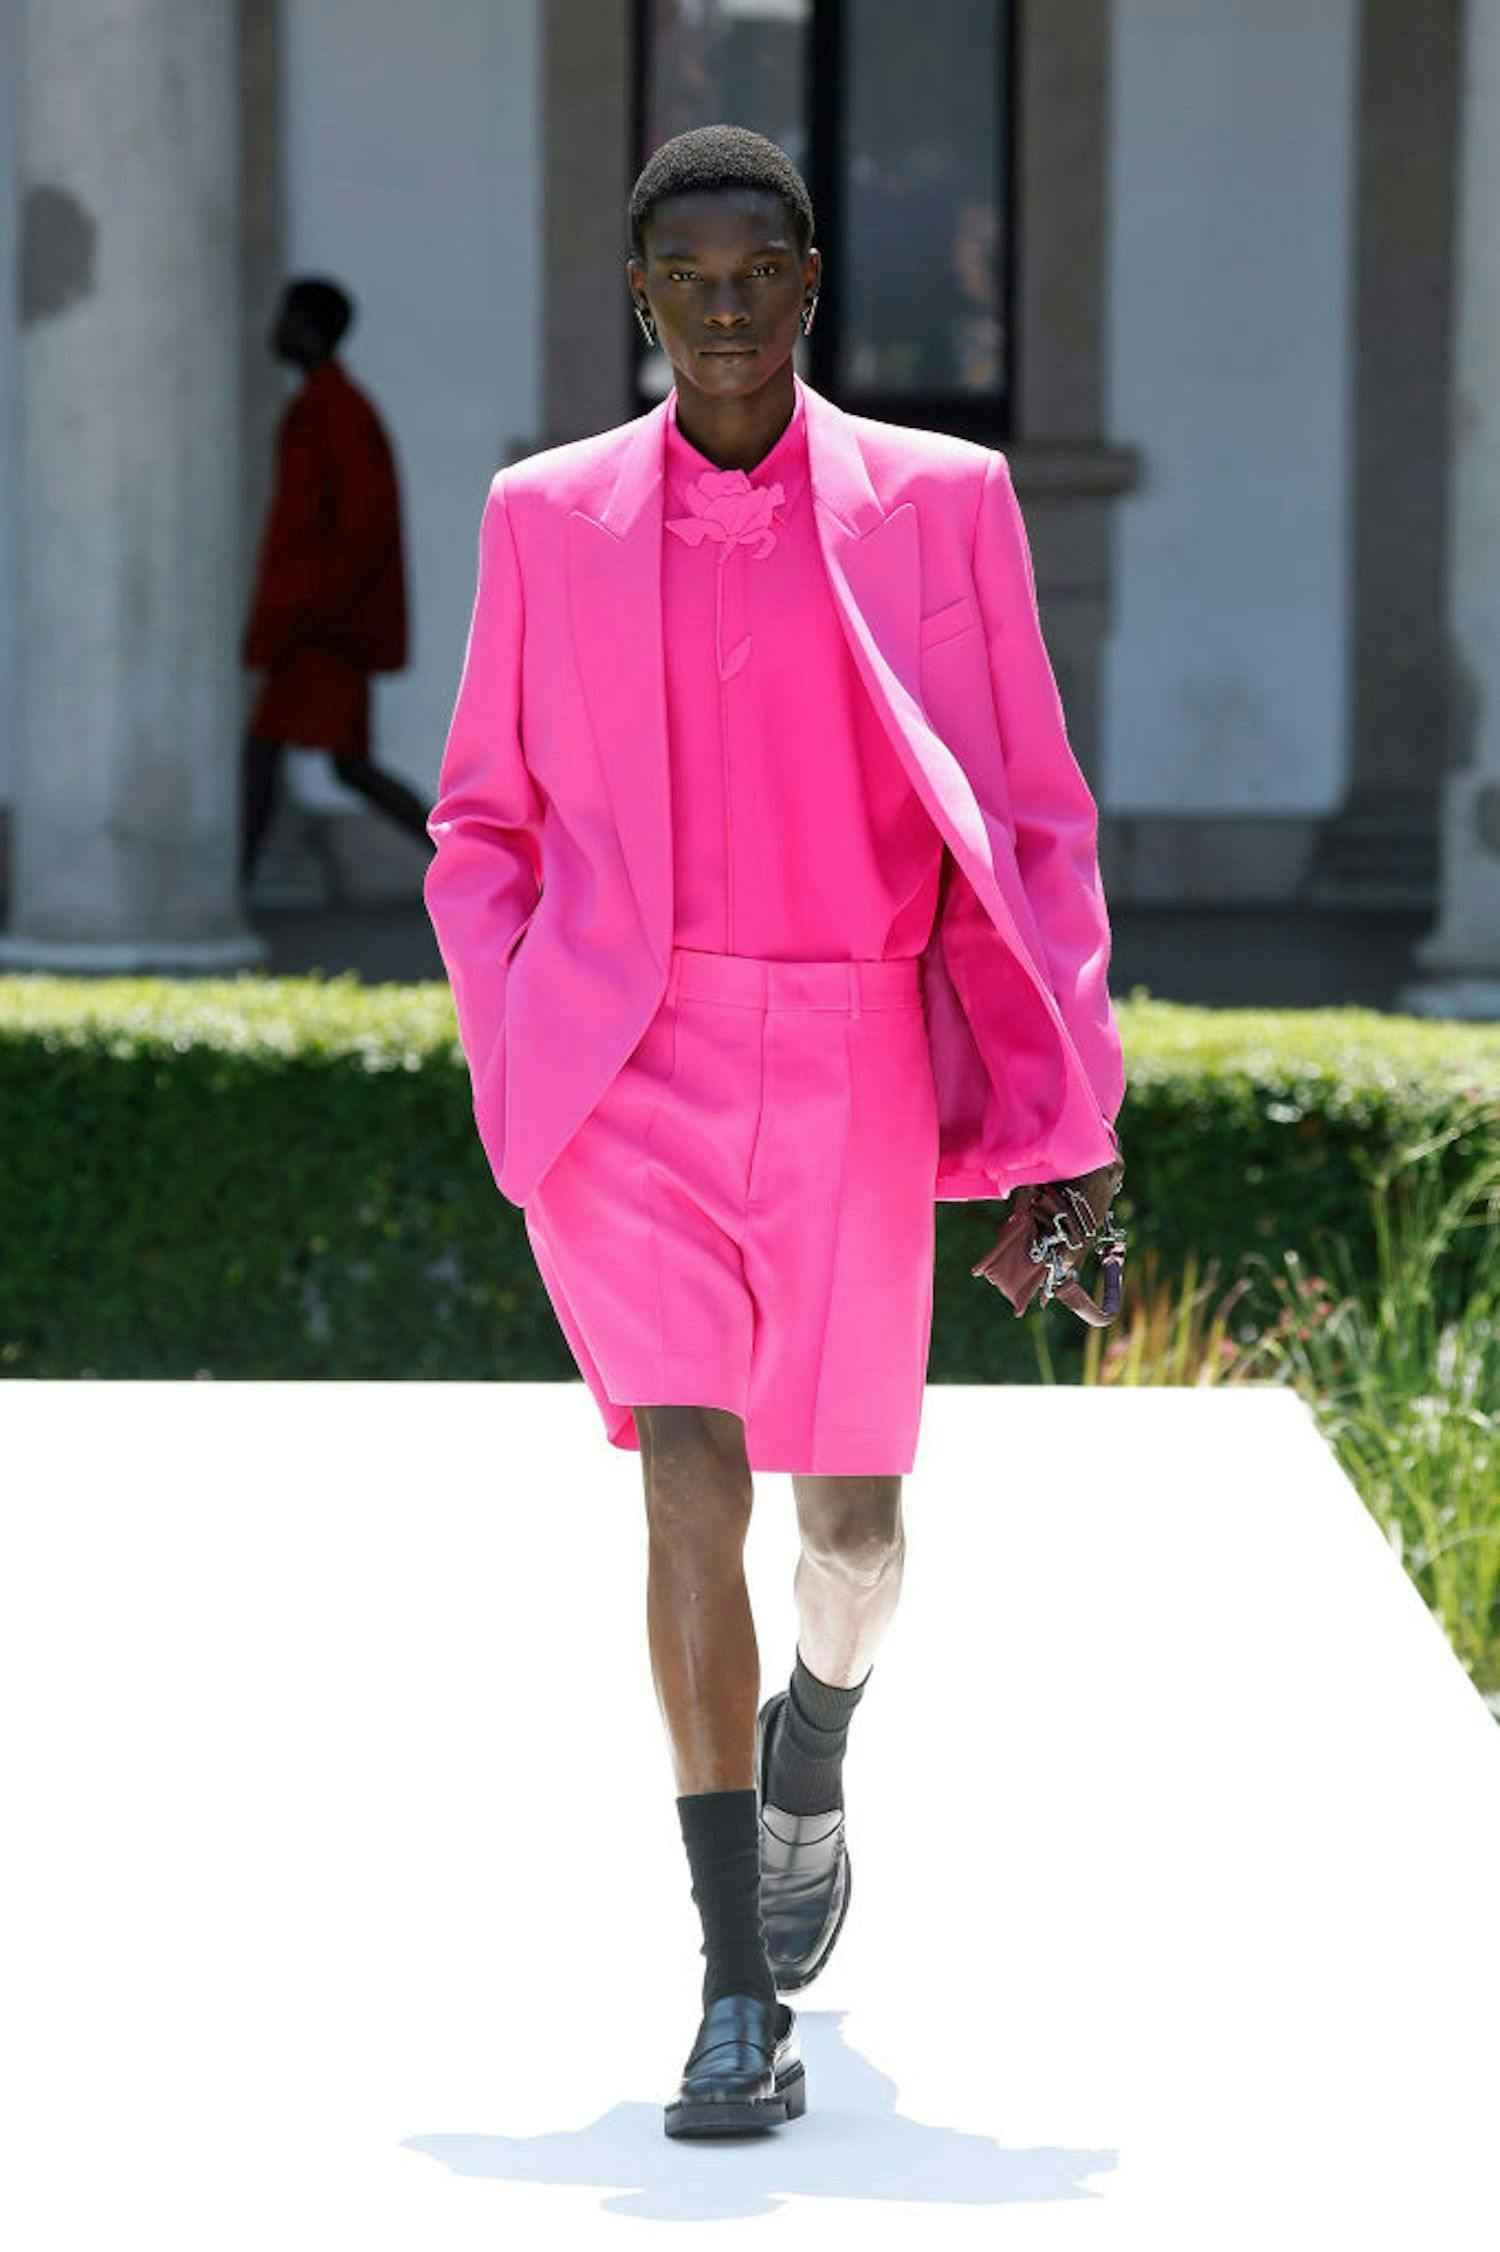 A model in a pink short suit.